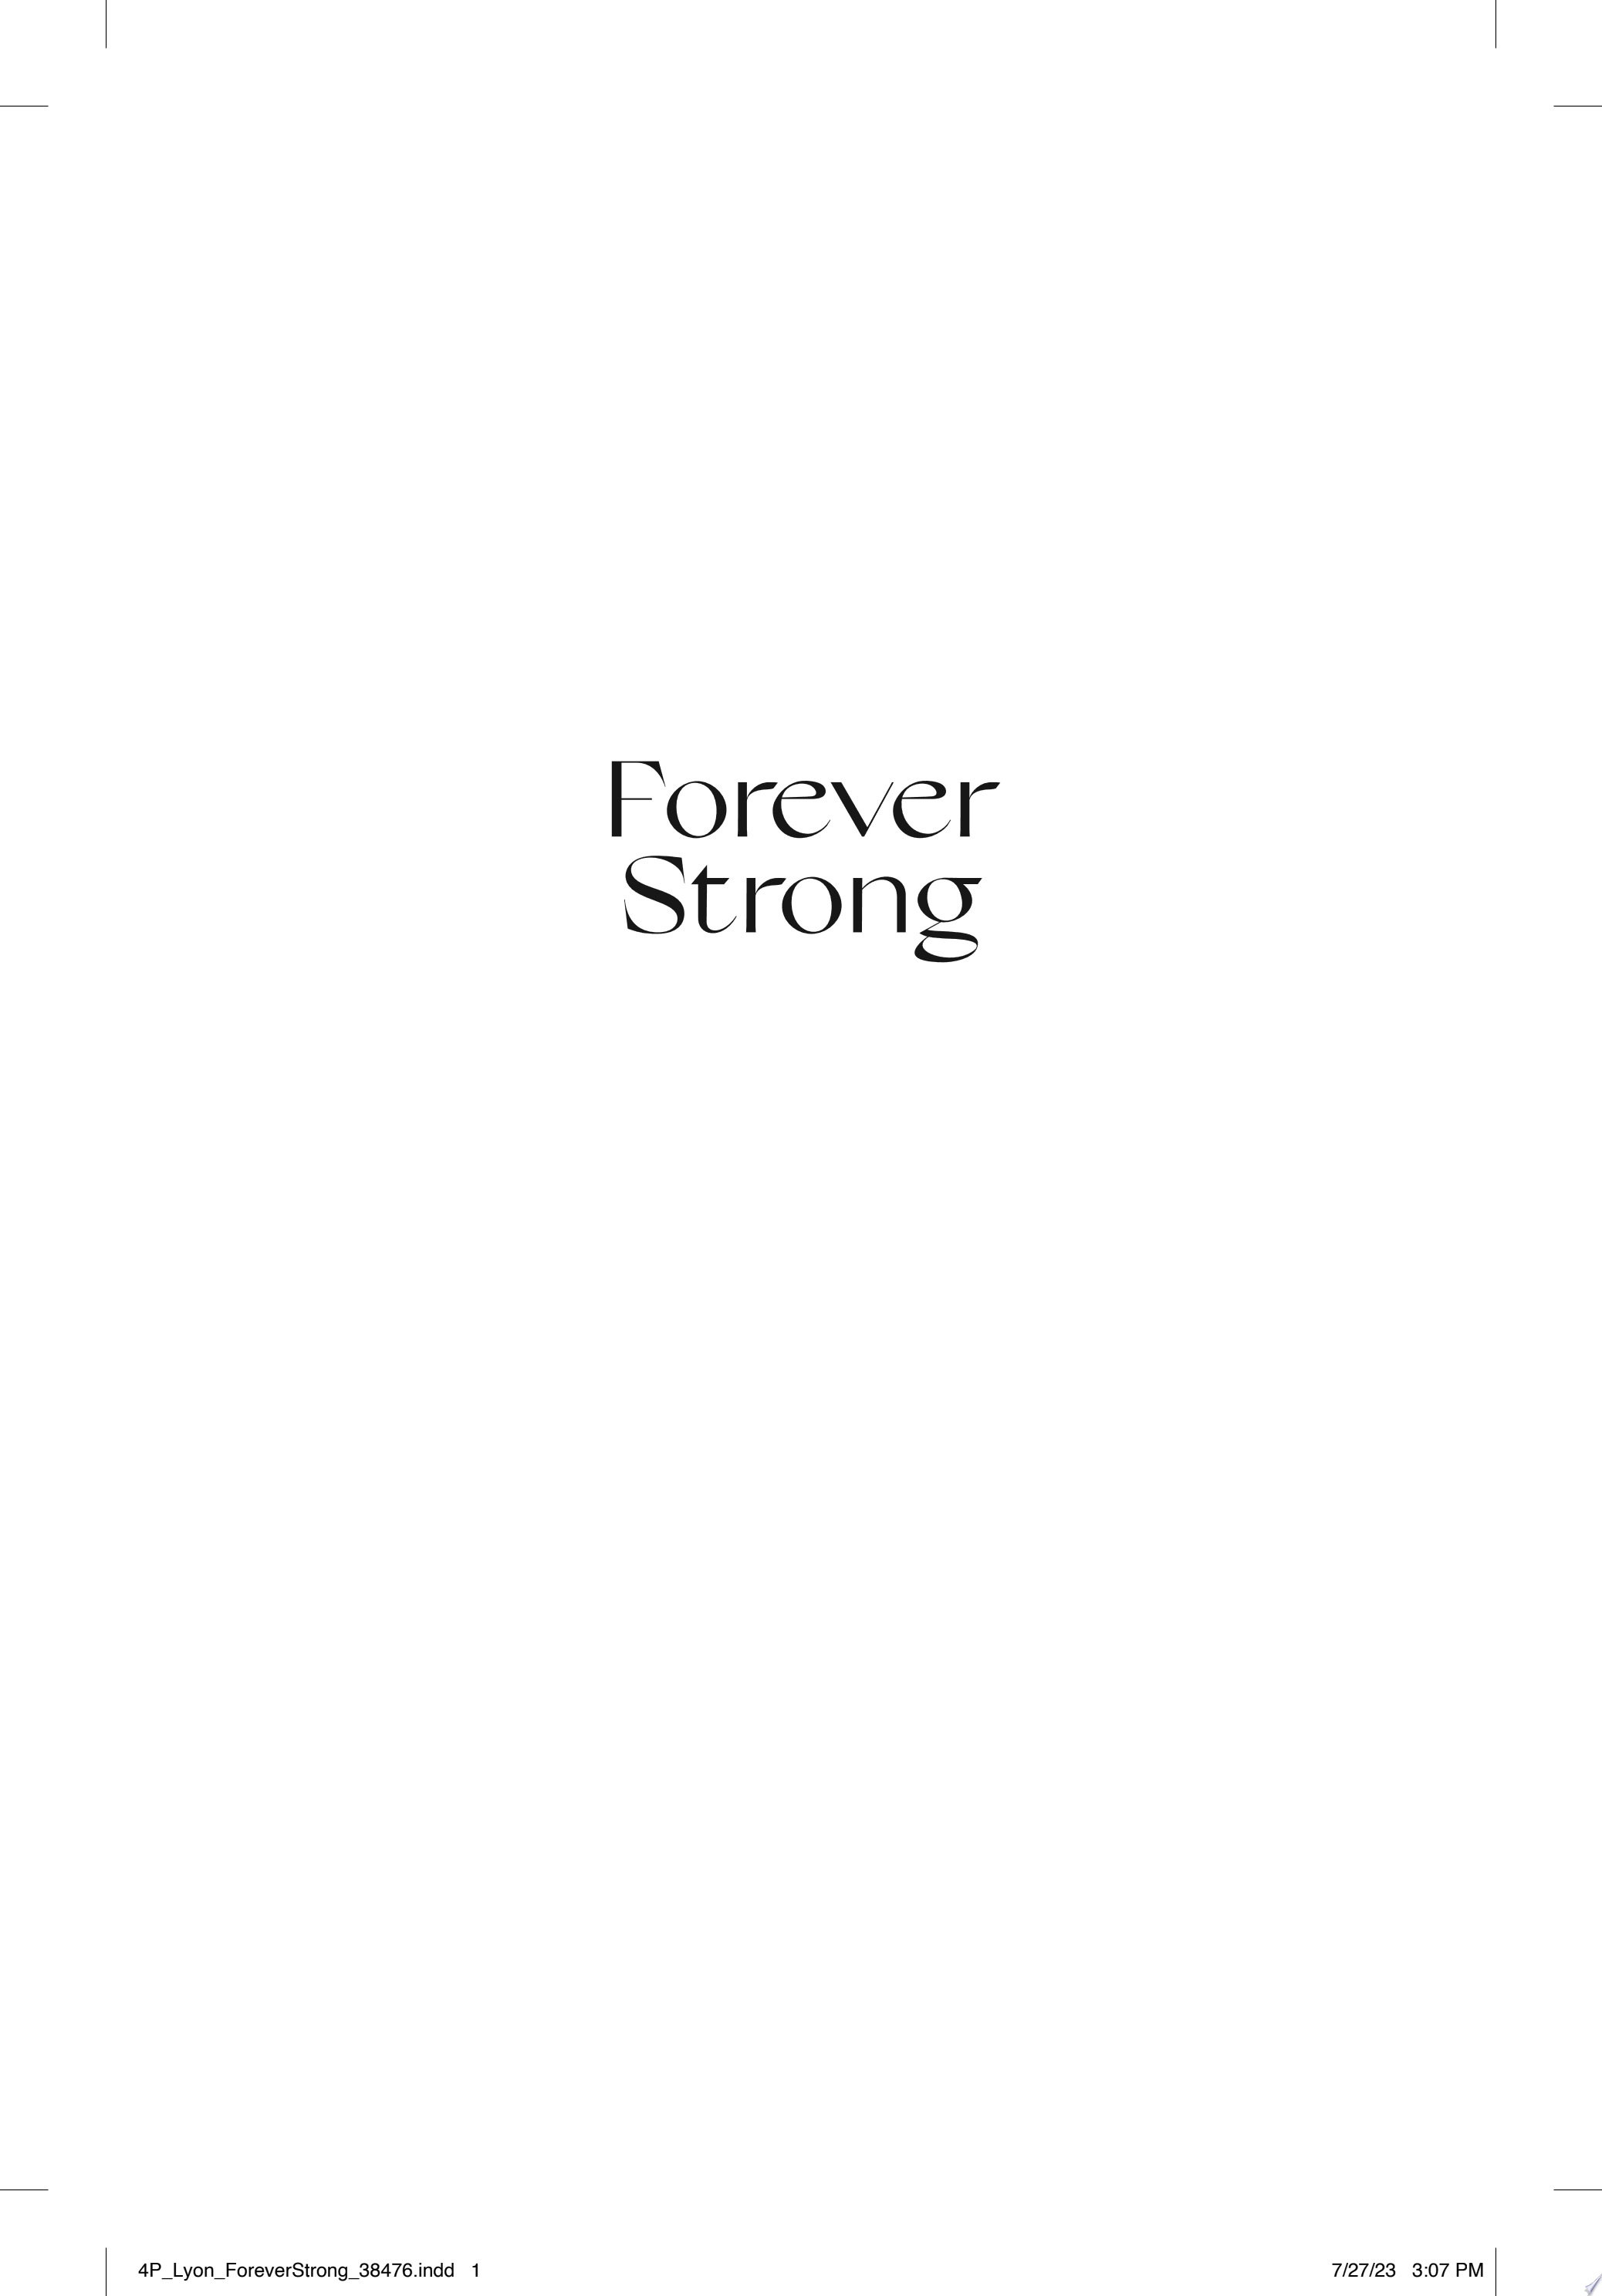 Image for "Forever Strong"